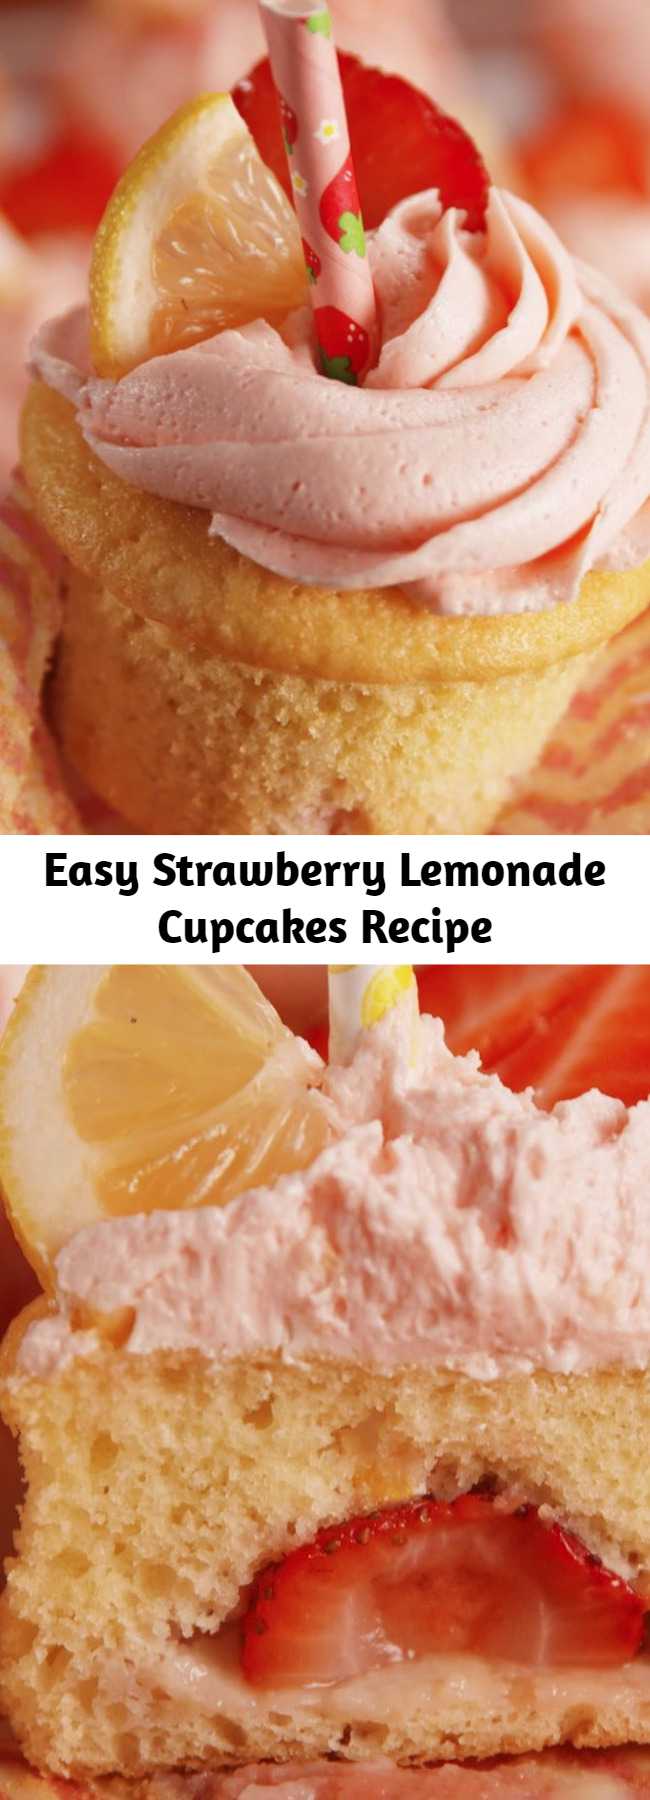 Easy Strawberry Lemonade Cupcakes Recipe - Sweet strawberry and tart lemon are seriously perfect together.